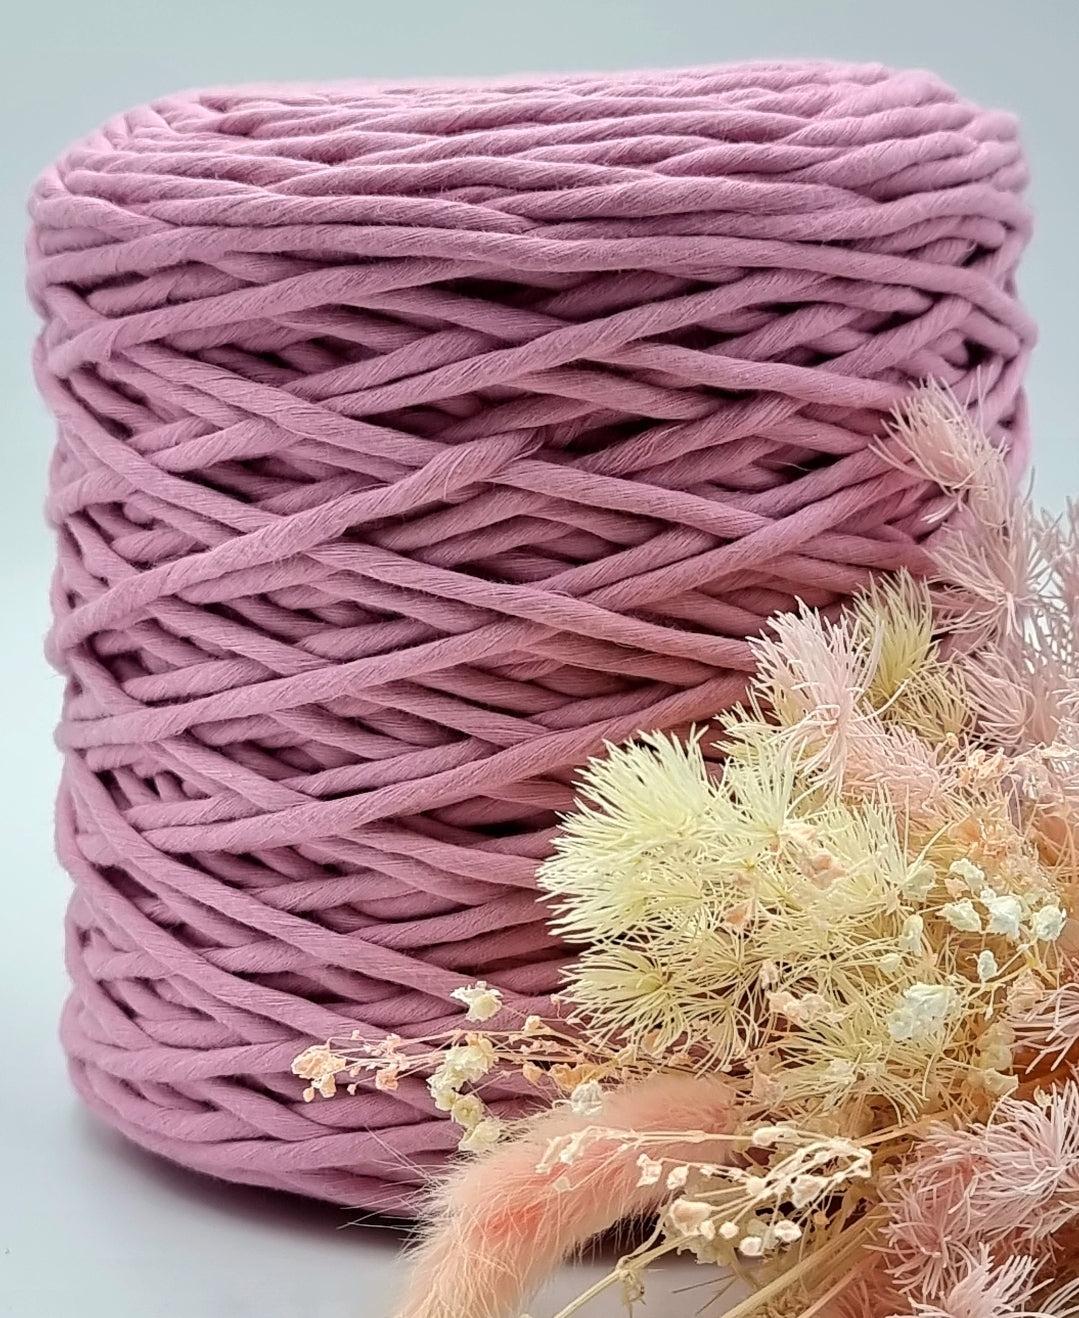 Candy Pink - 3MM Single Strand Luxe Cotton String 1KG Stardust Melbourne